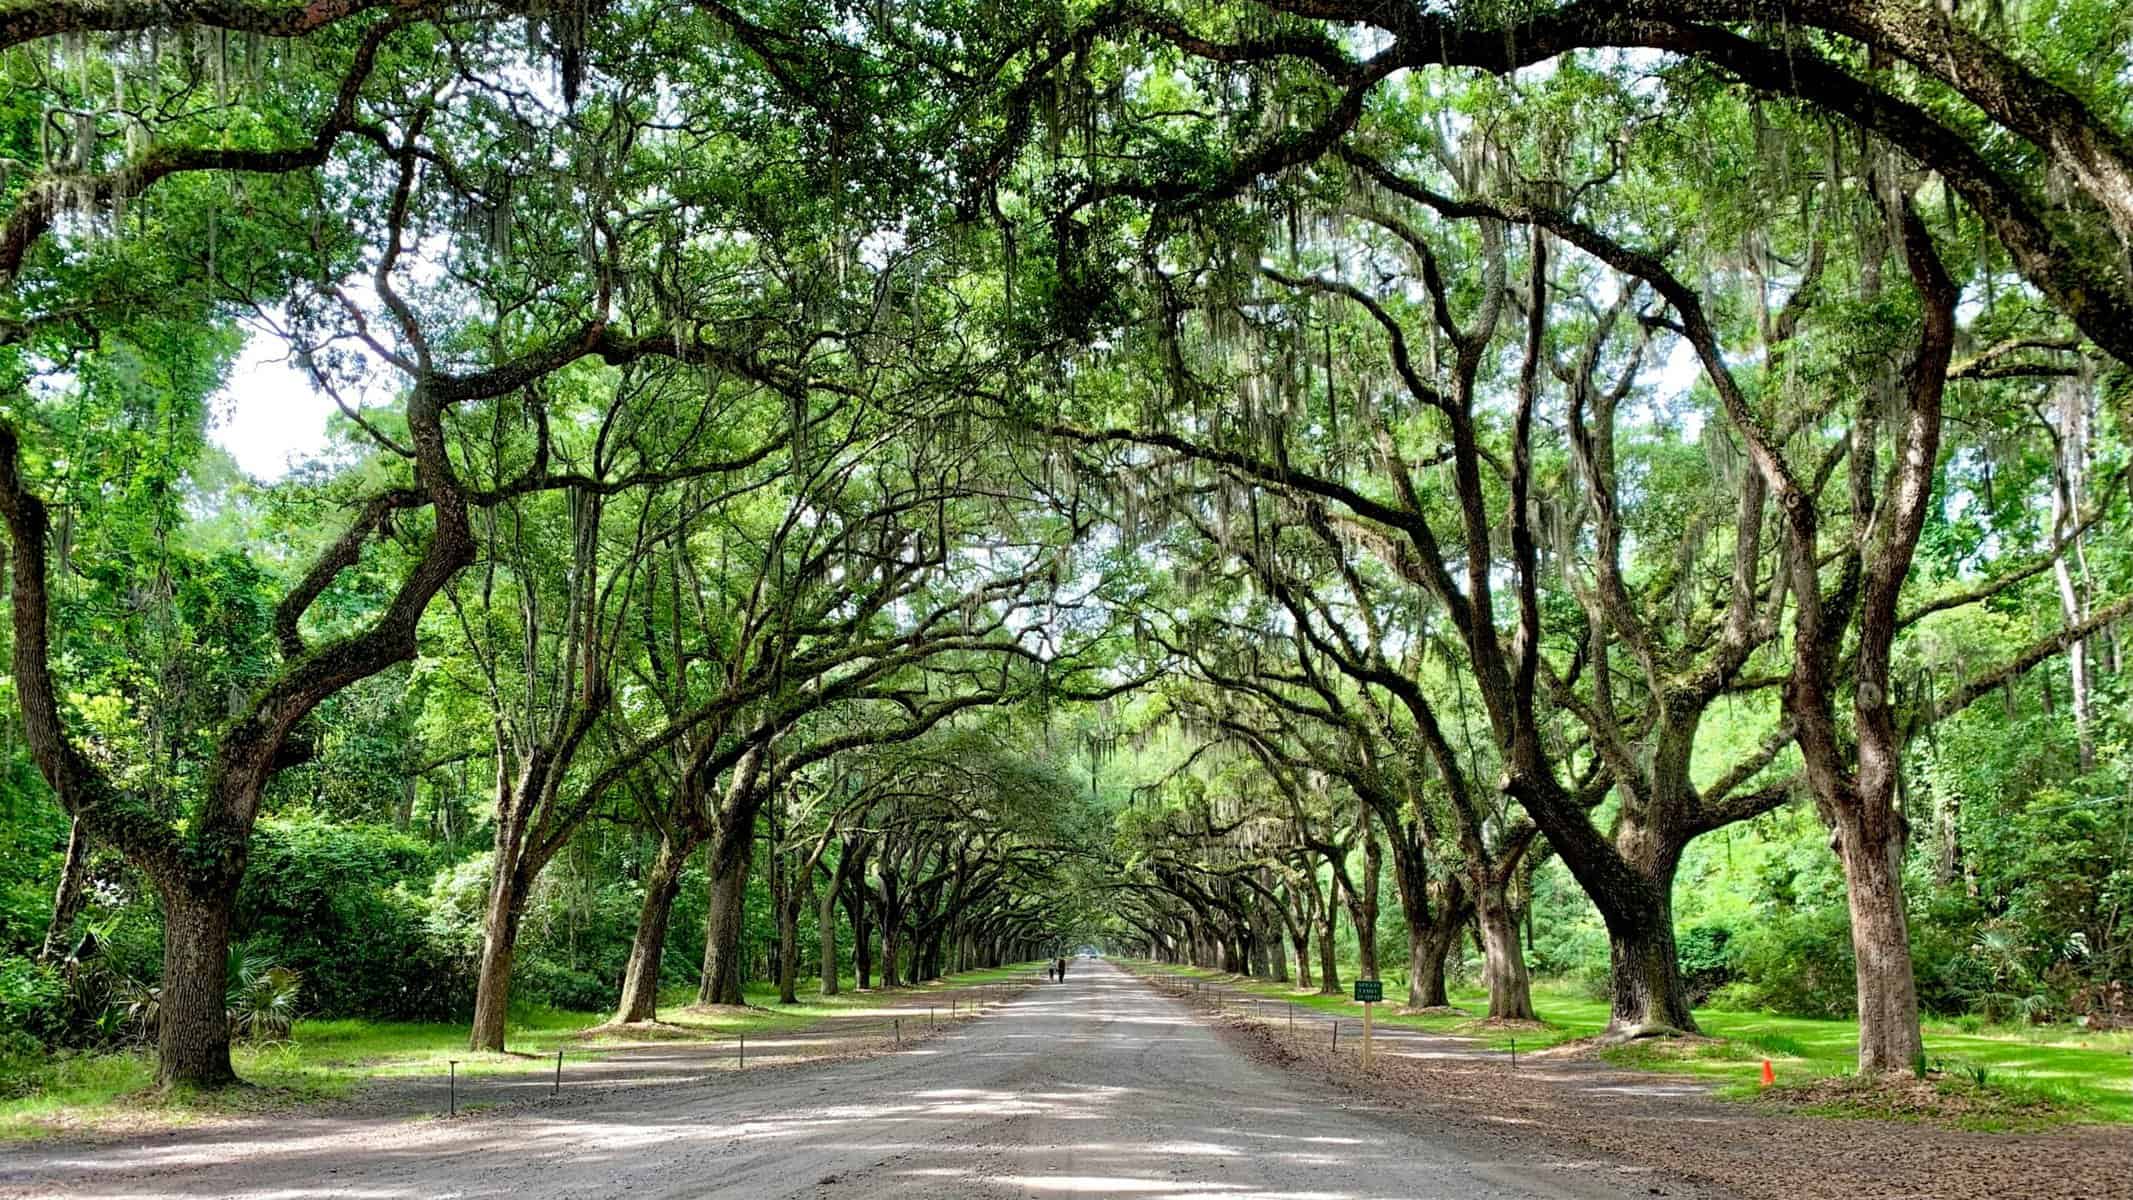 A road is shown with green trees arching over it.